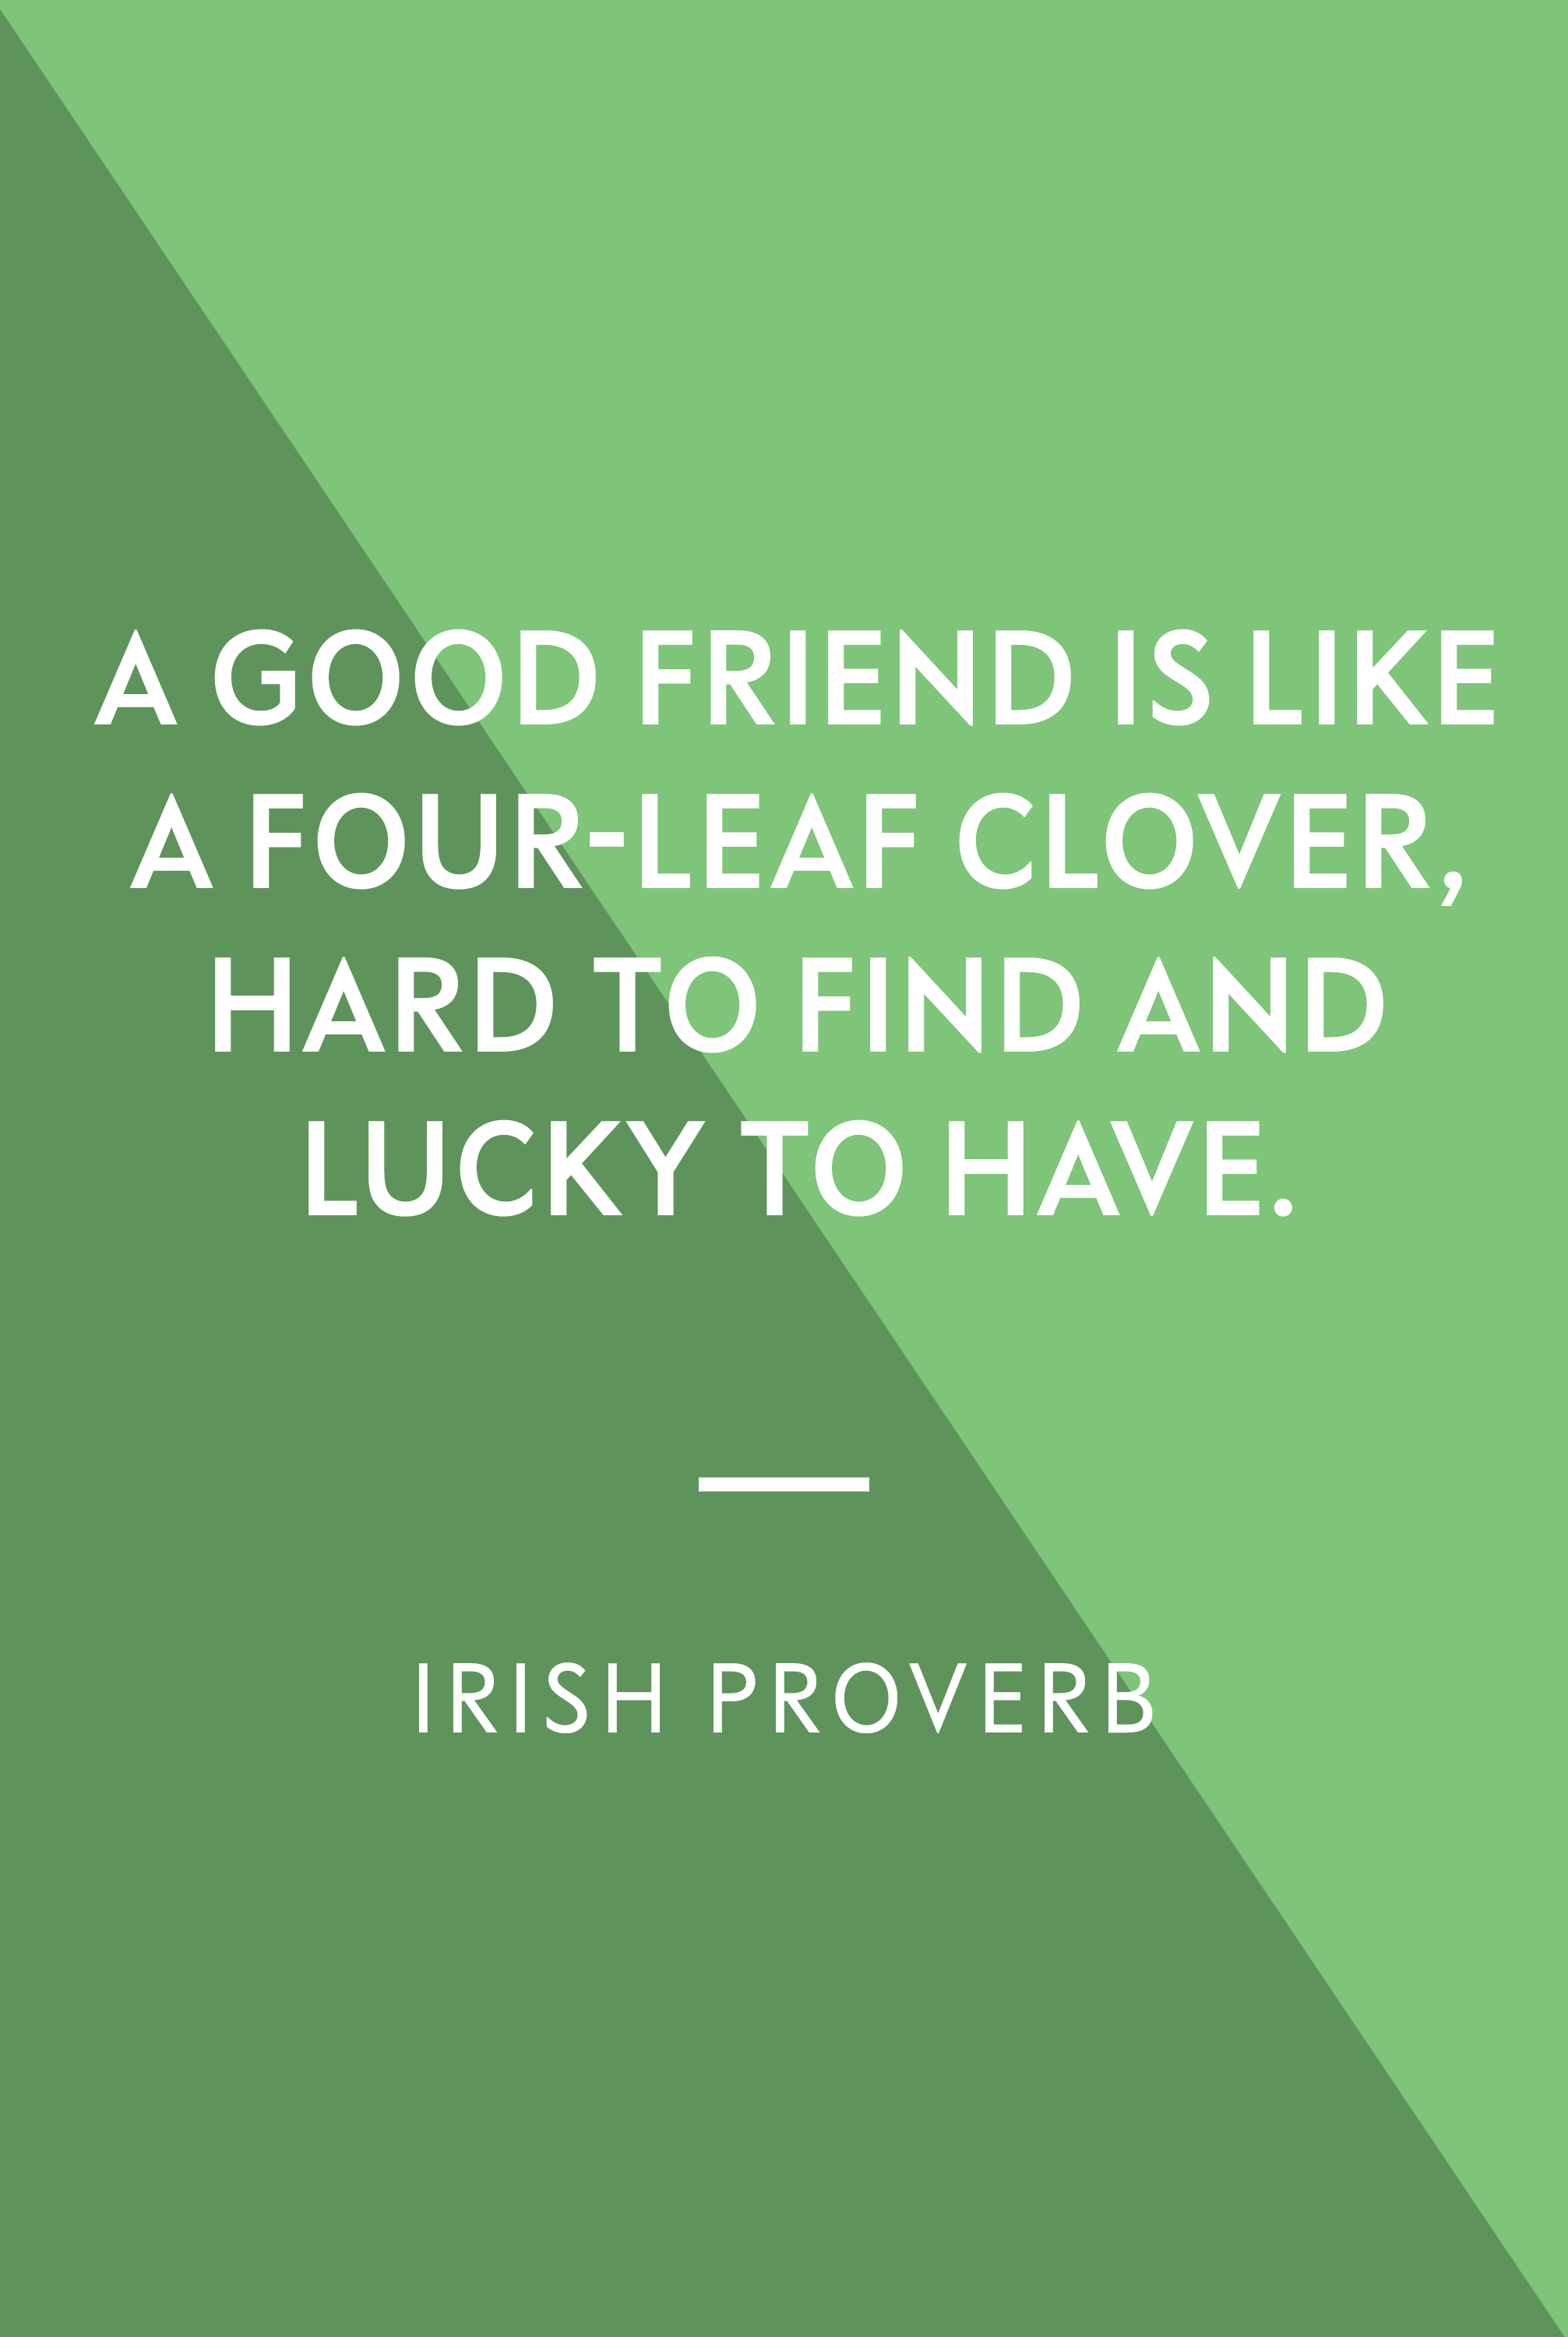 Inspirational Quotes about Leprechauns To Bring on the Luck